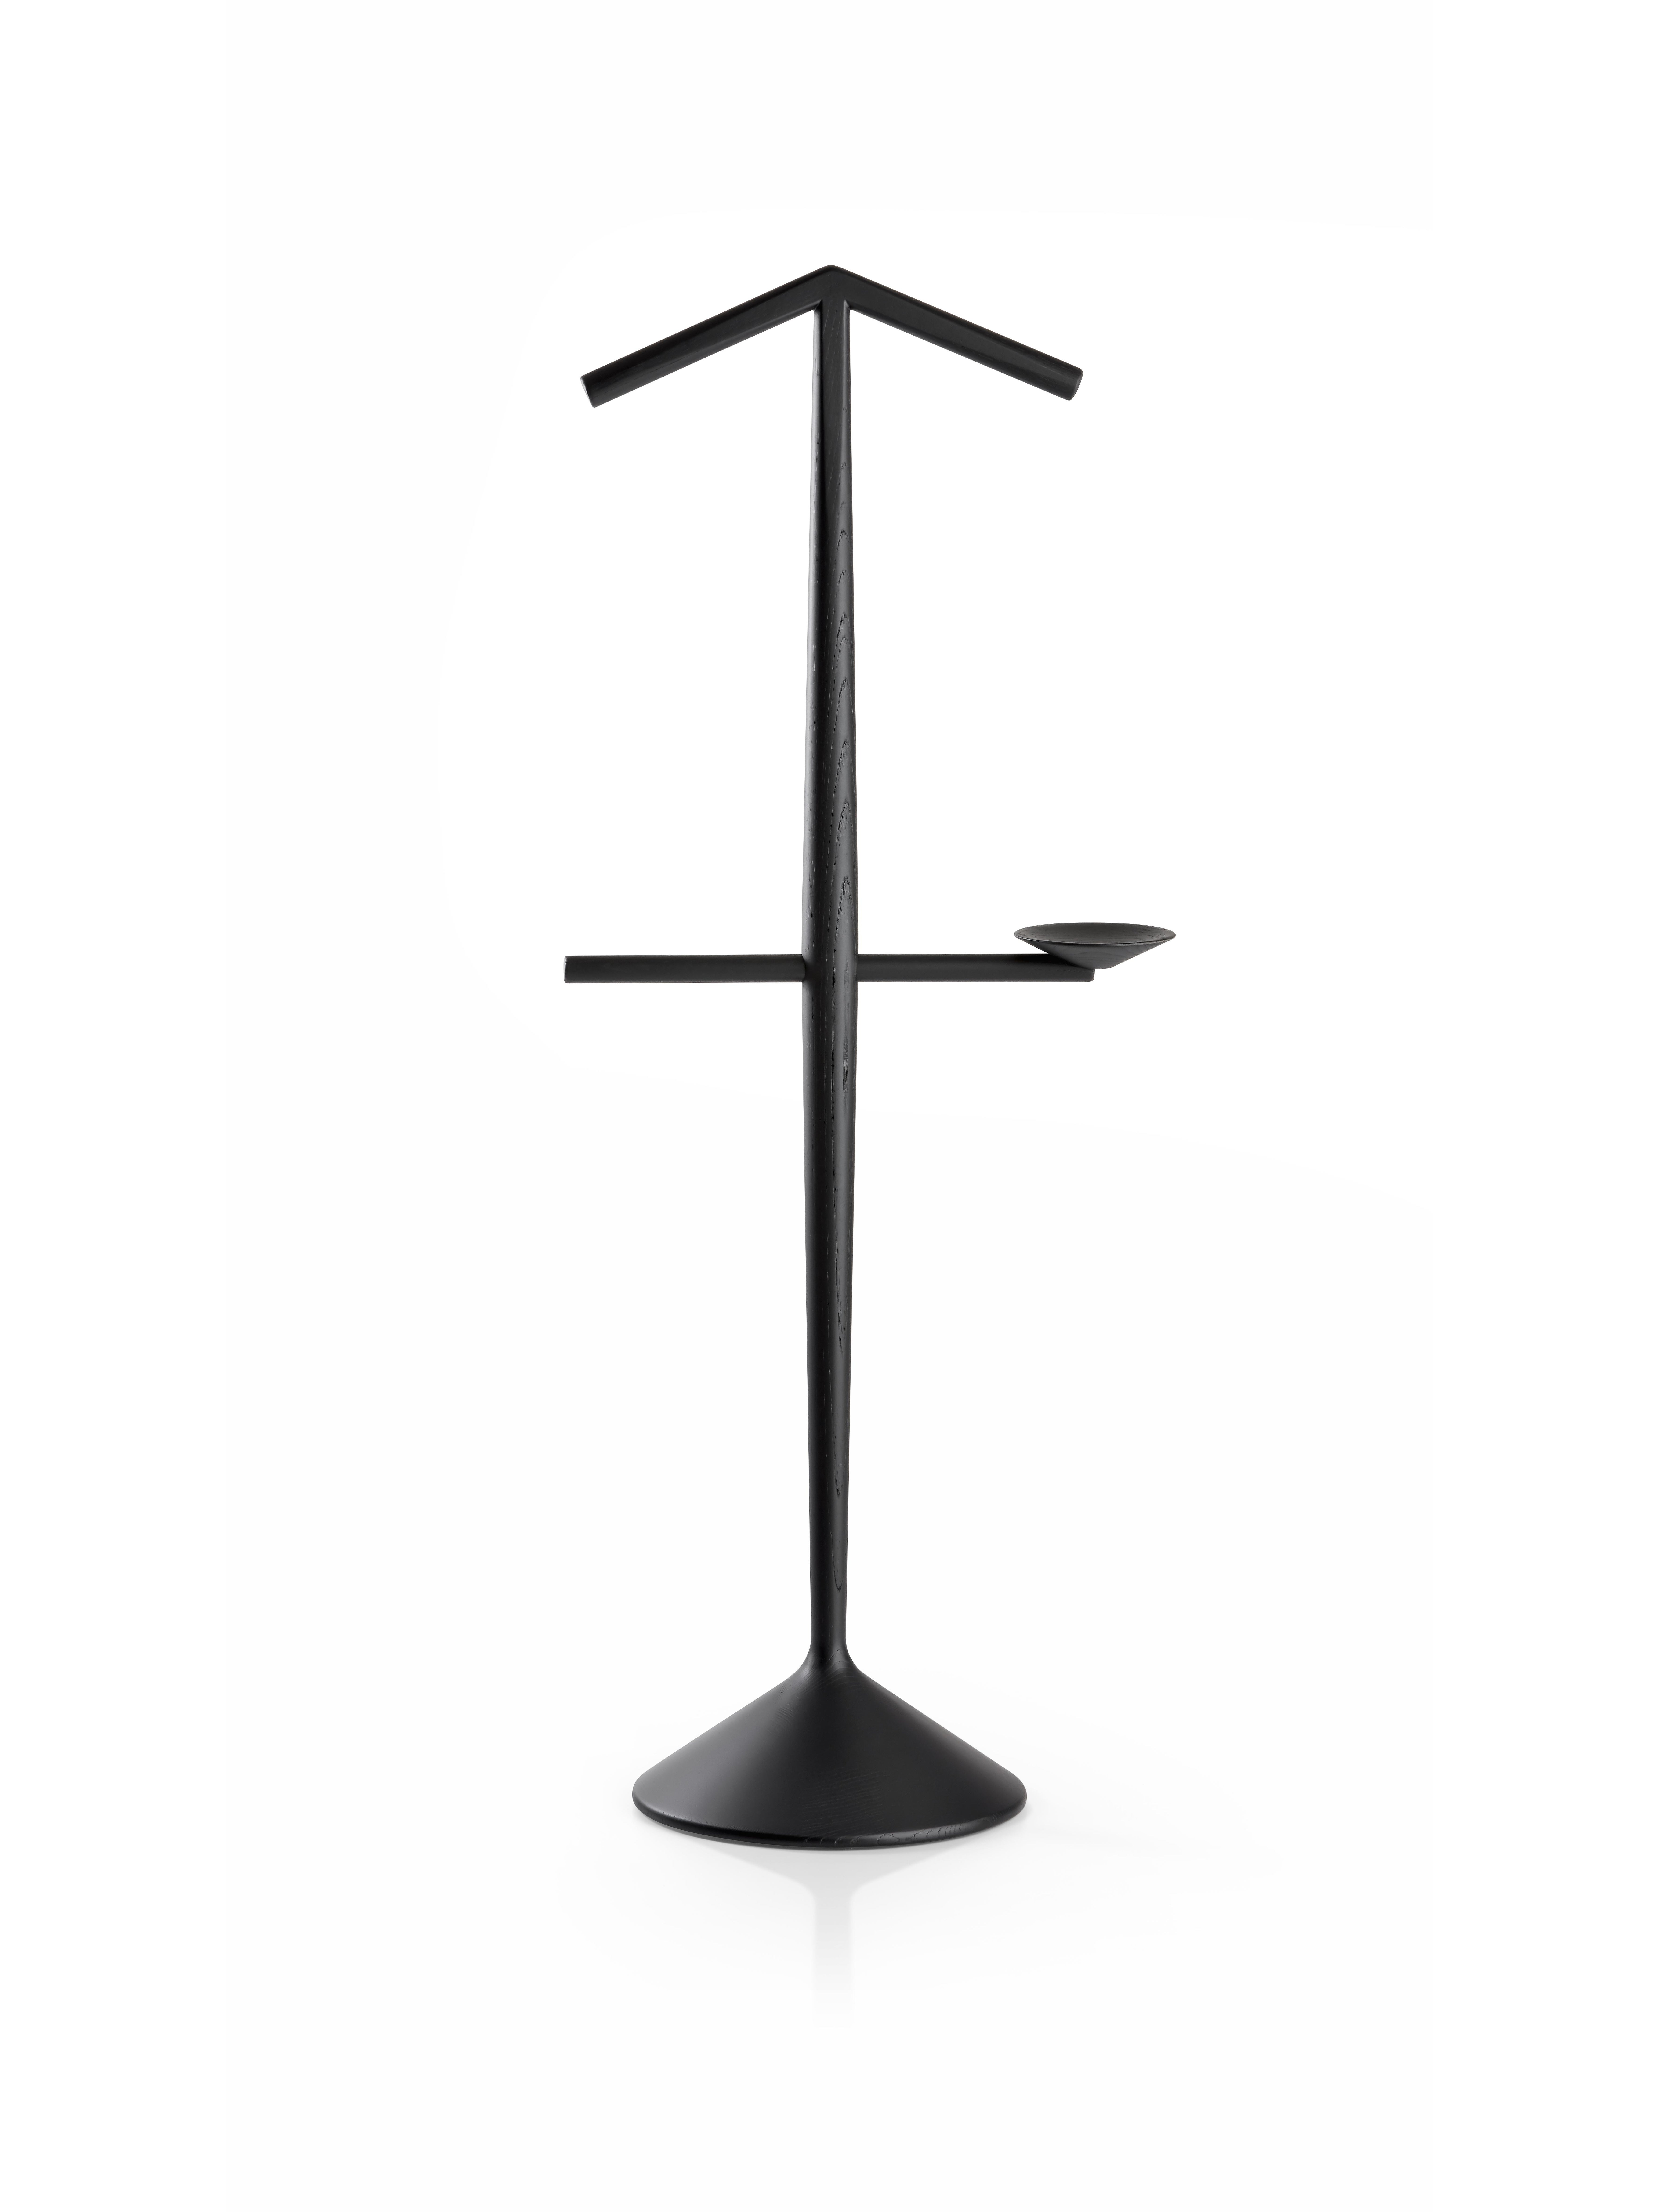 A valet stand: no name was more suitable to describe an use. This involves a humble, clearly functional typology, made to serve more than to represent. In fact, it works to support clothes, to fold shirt and trousers, to prepare the evening before